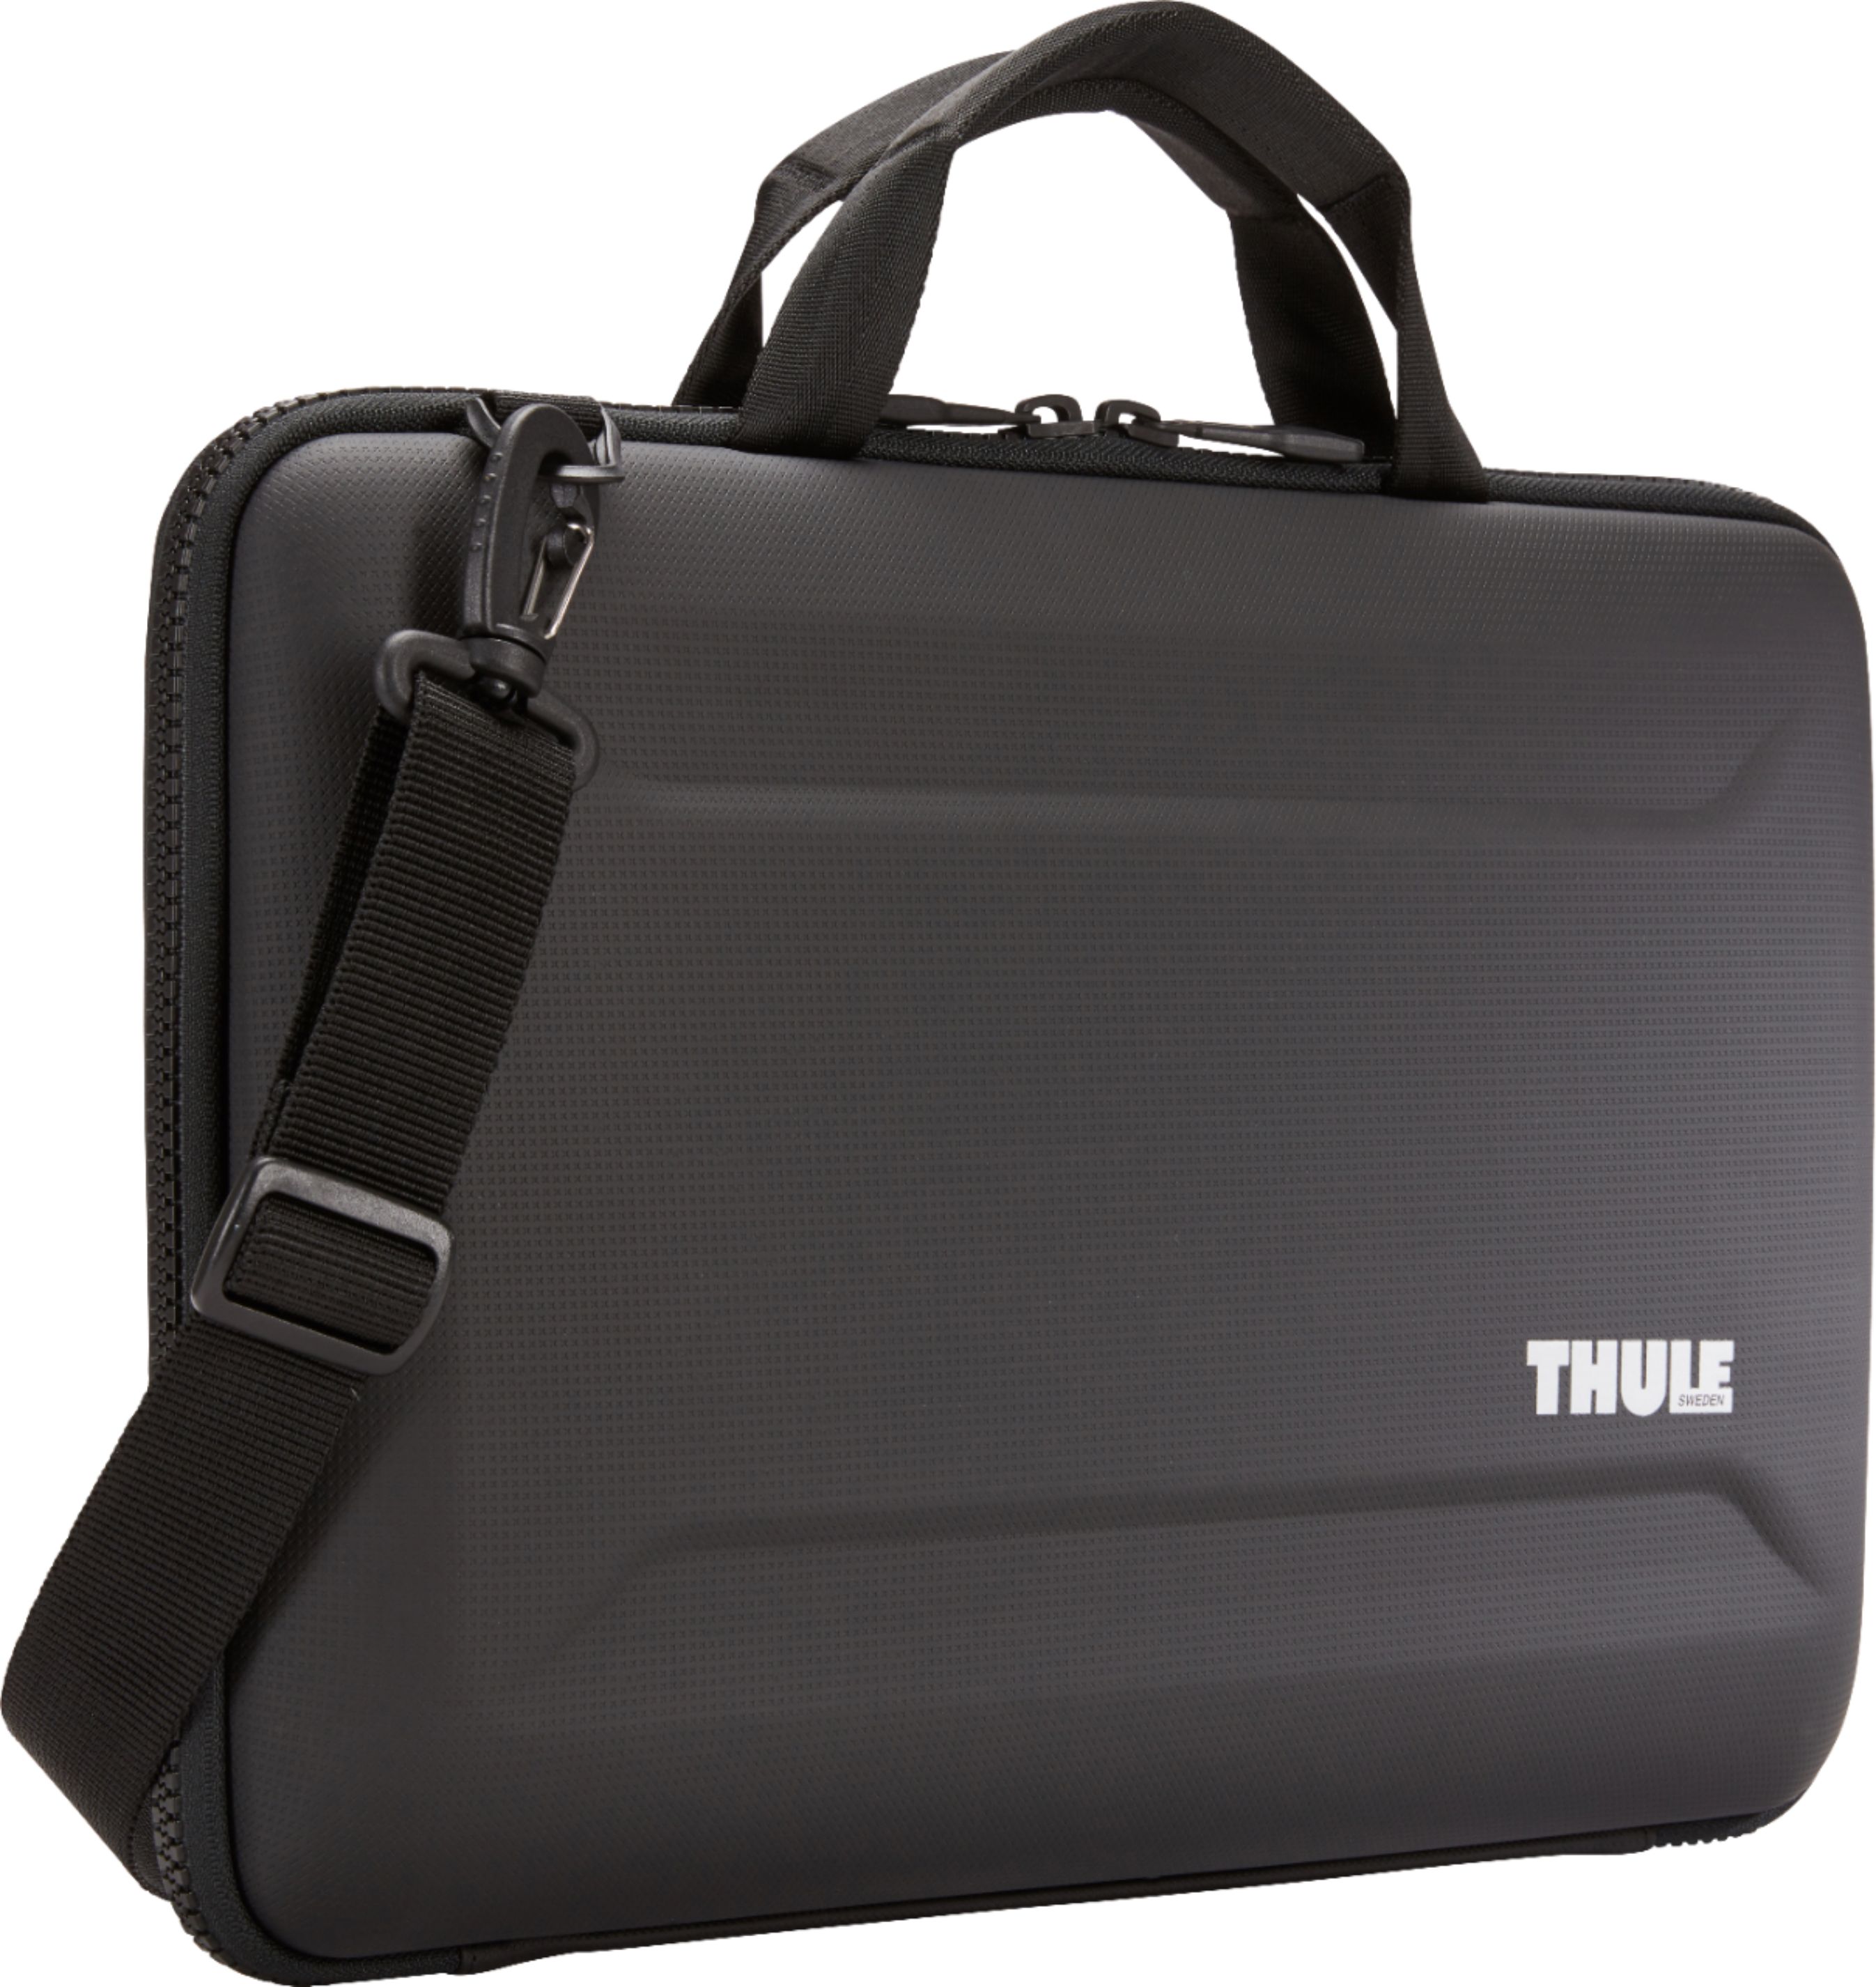 Thule - Gauntlet 4 Attaché/Case for all 16” Apple MacBook Pro Models, all 15” Apple MacBook Pro Models & PCs/Laptops up to 14.1" - Black